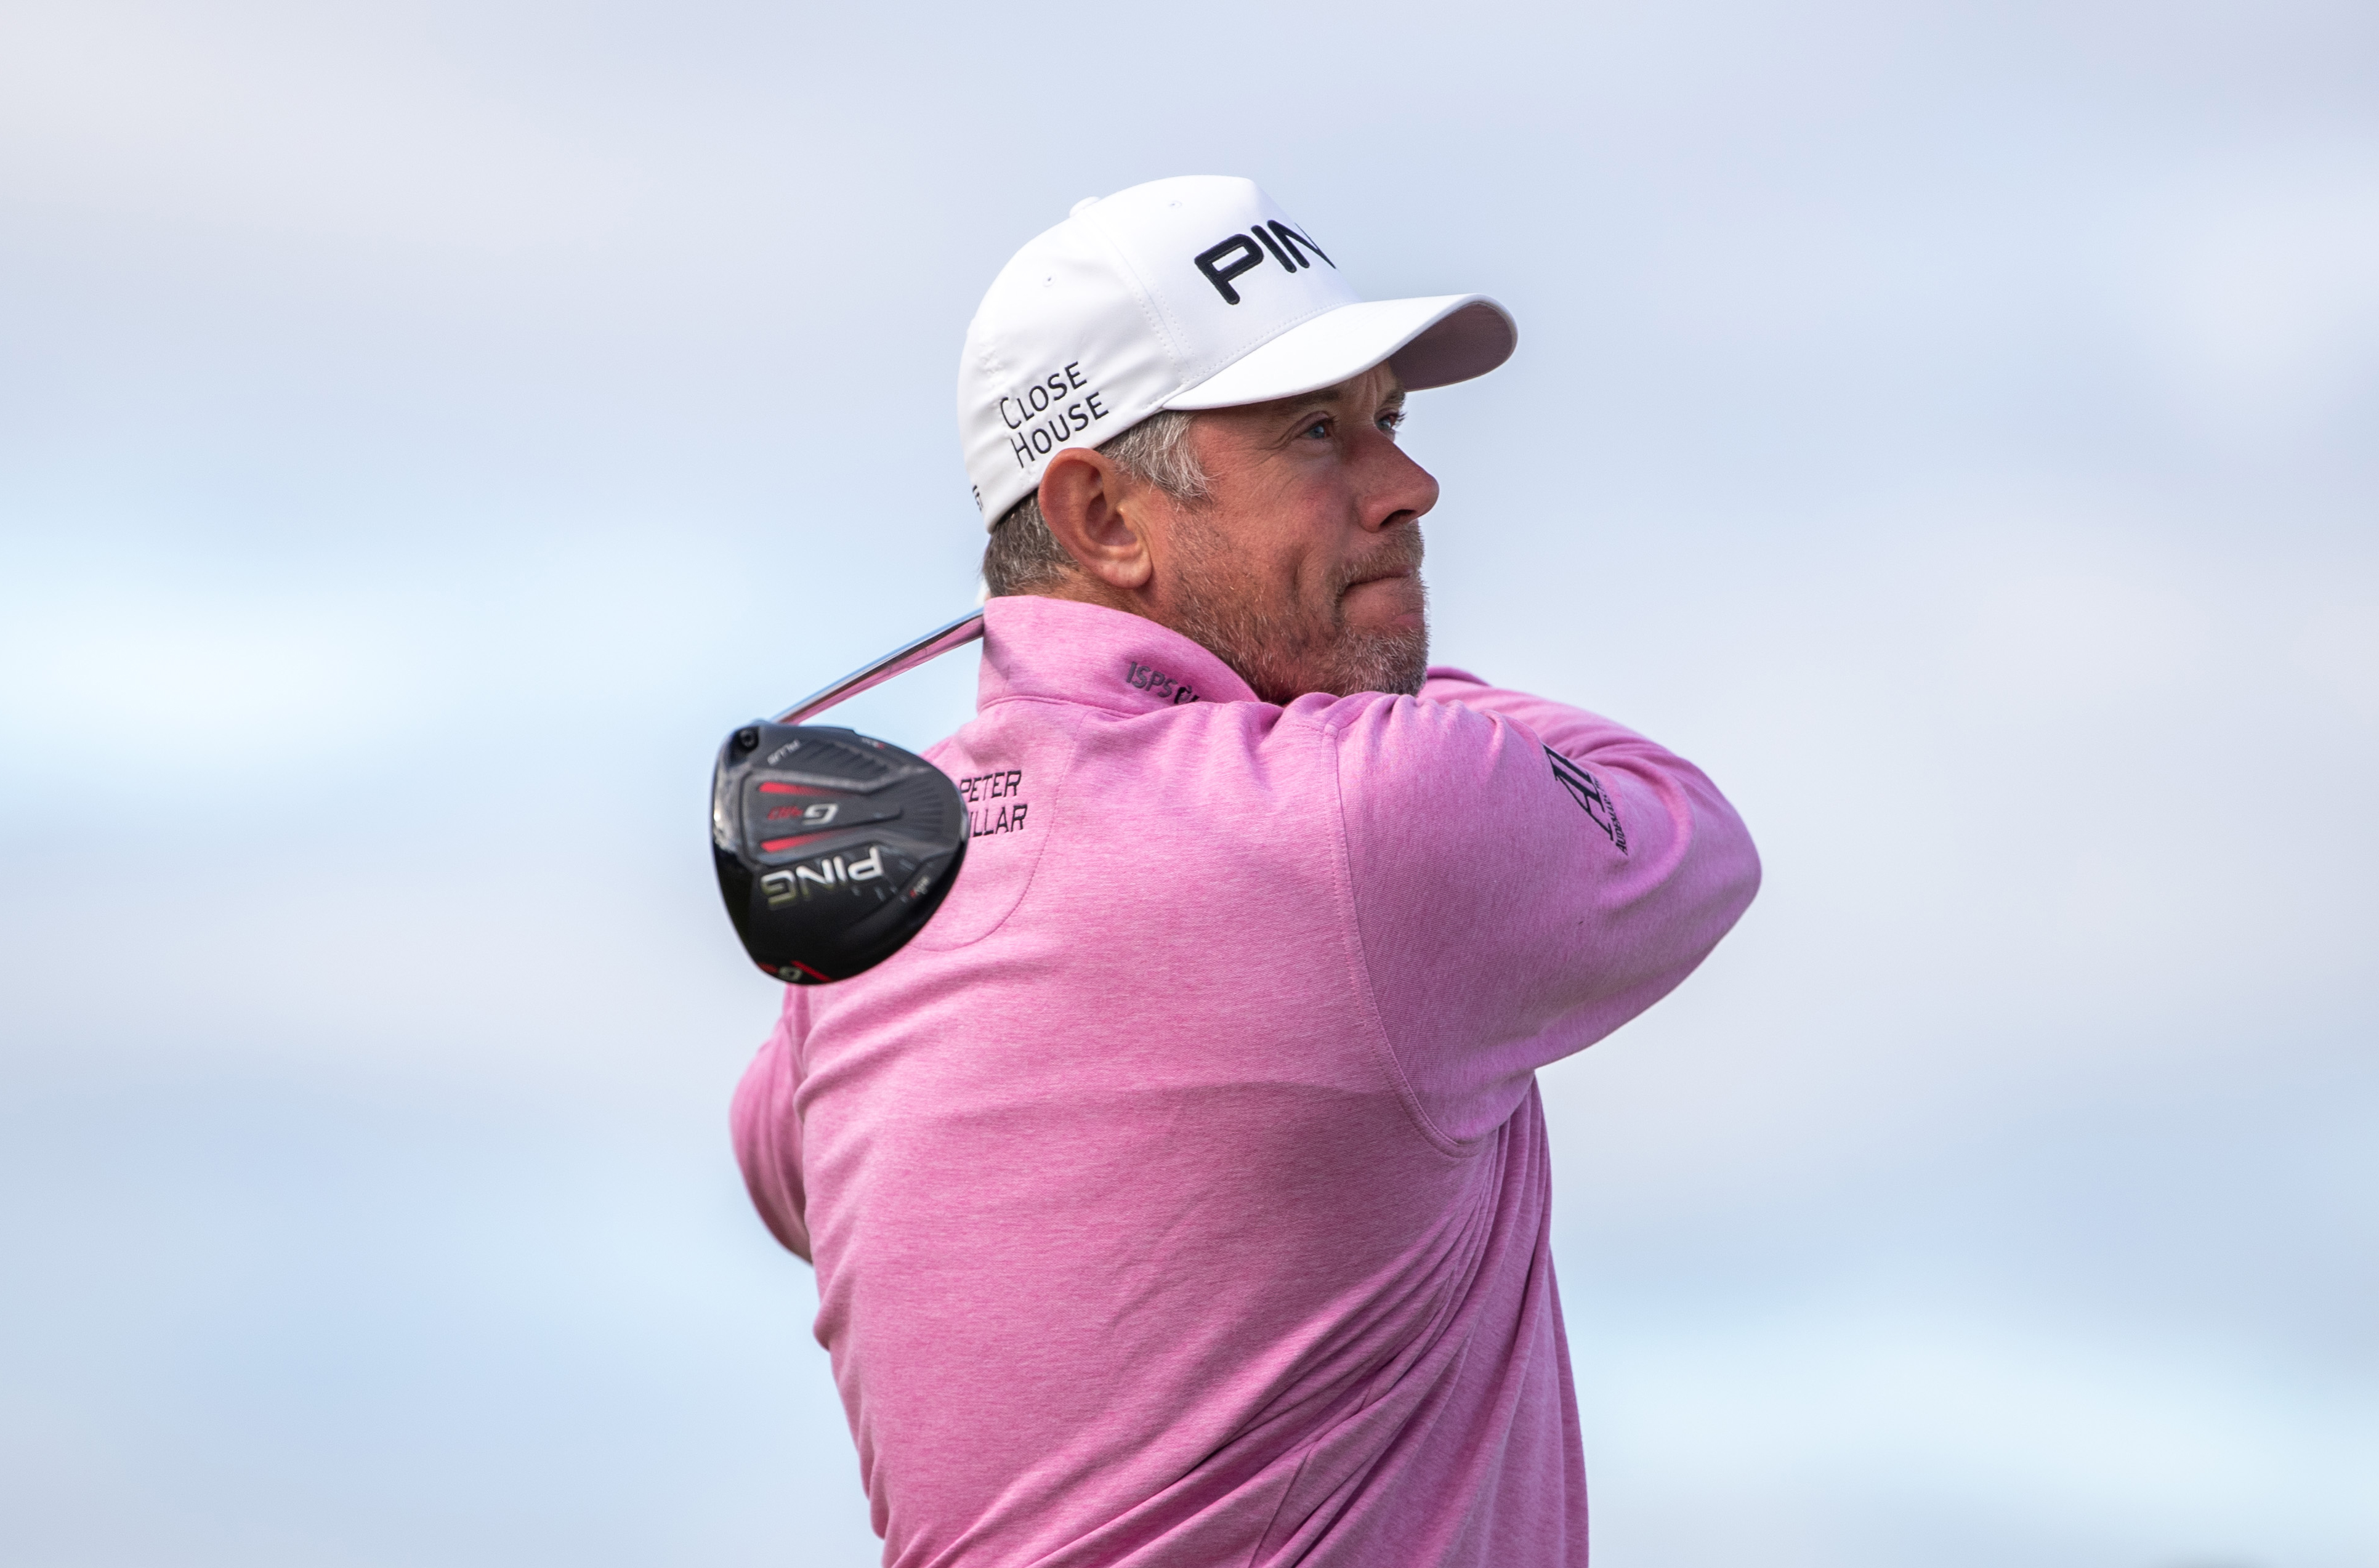 Lee Westwood: I can't envisage a Ryder Cup without golf fans